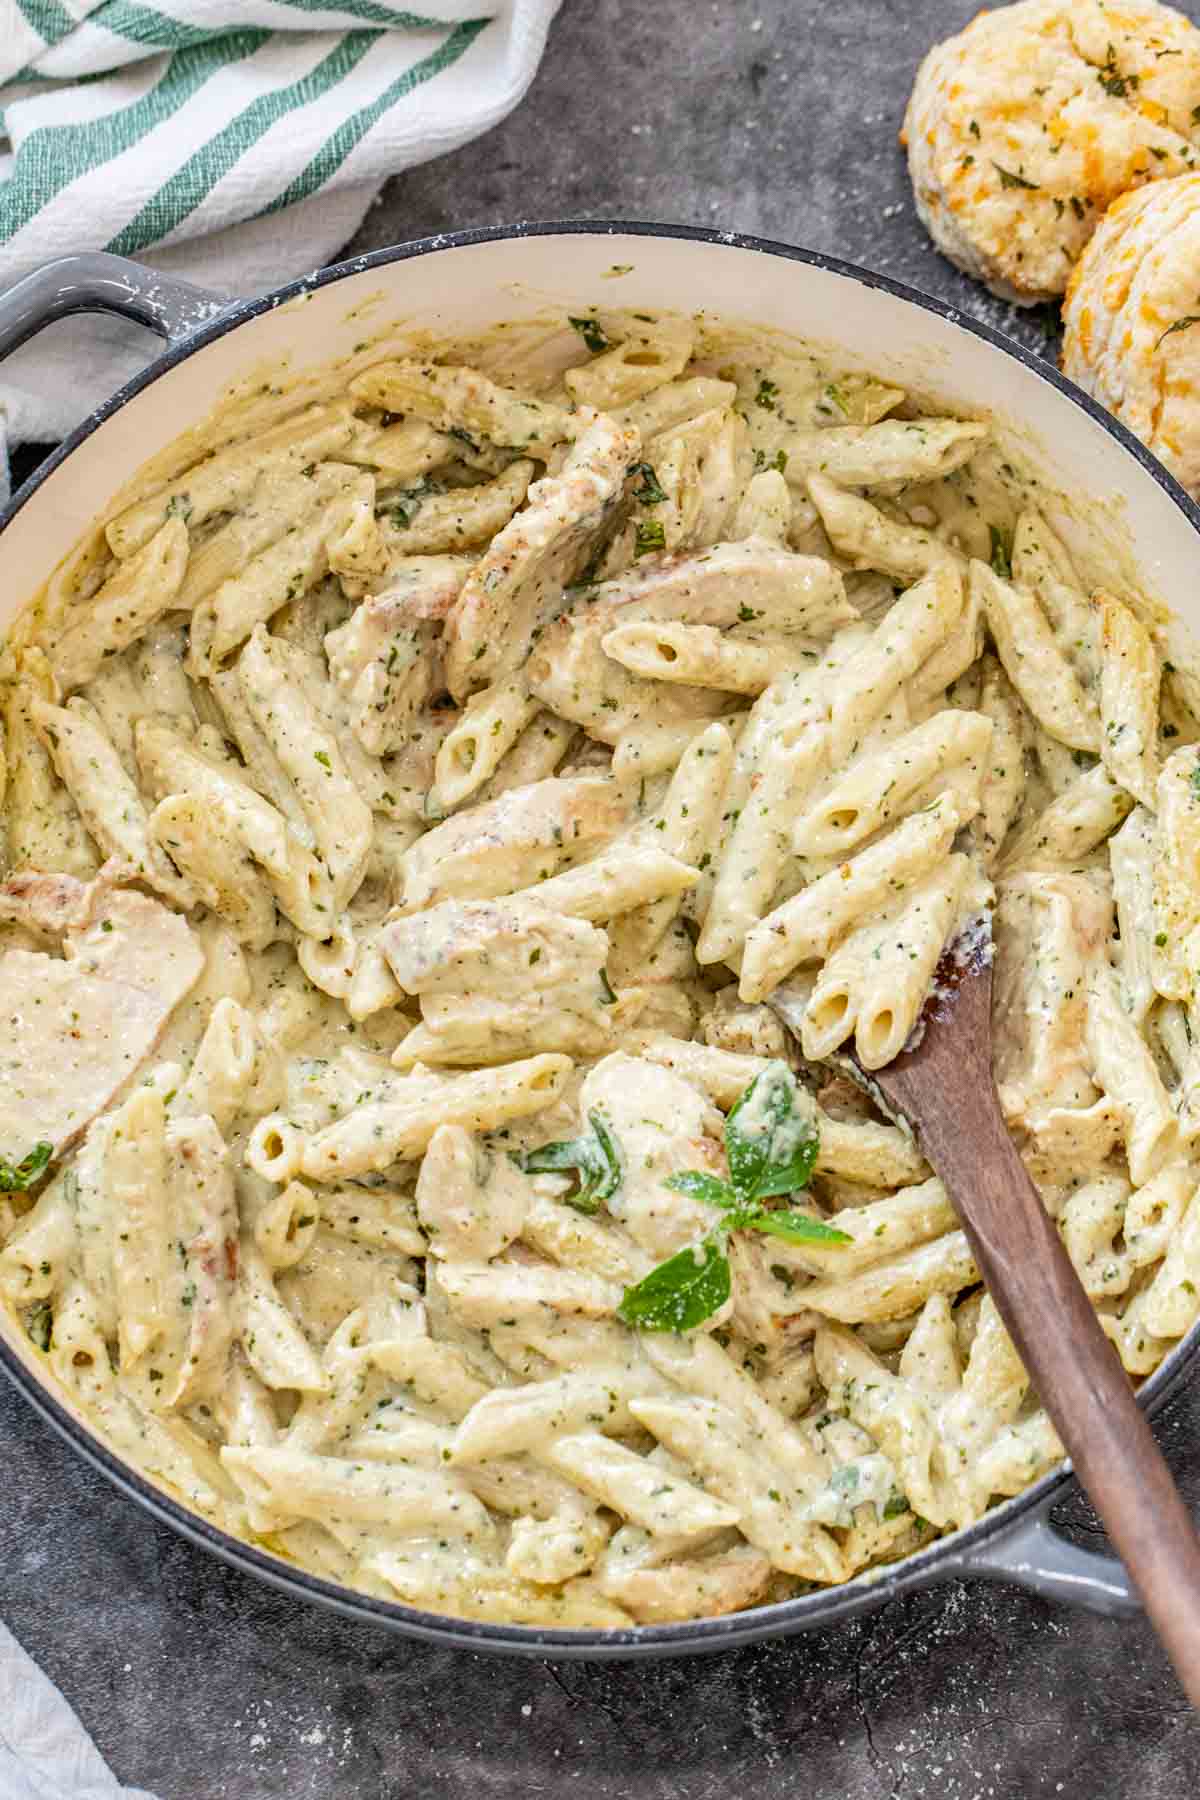 Pesto pasta in a gray deep skillet with a wooden spoon full of alfredo pasta.